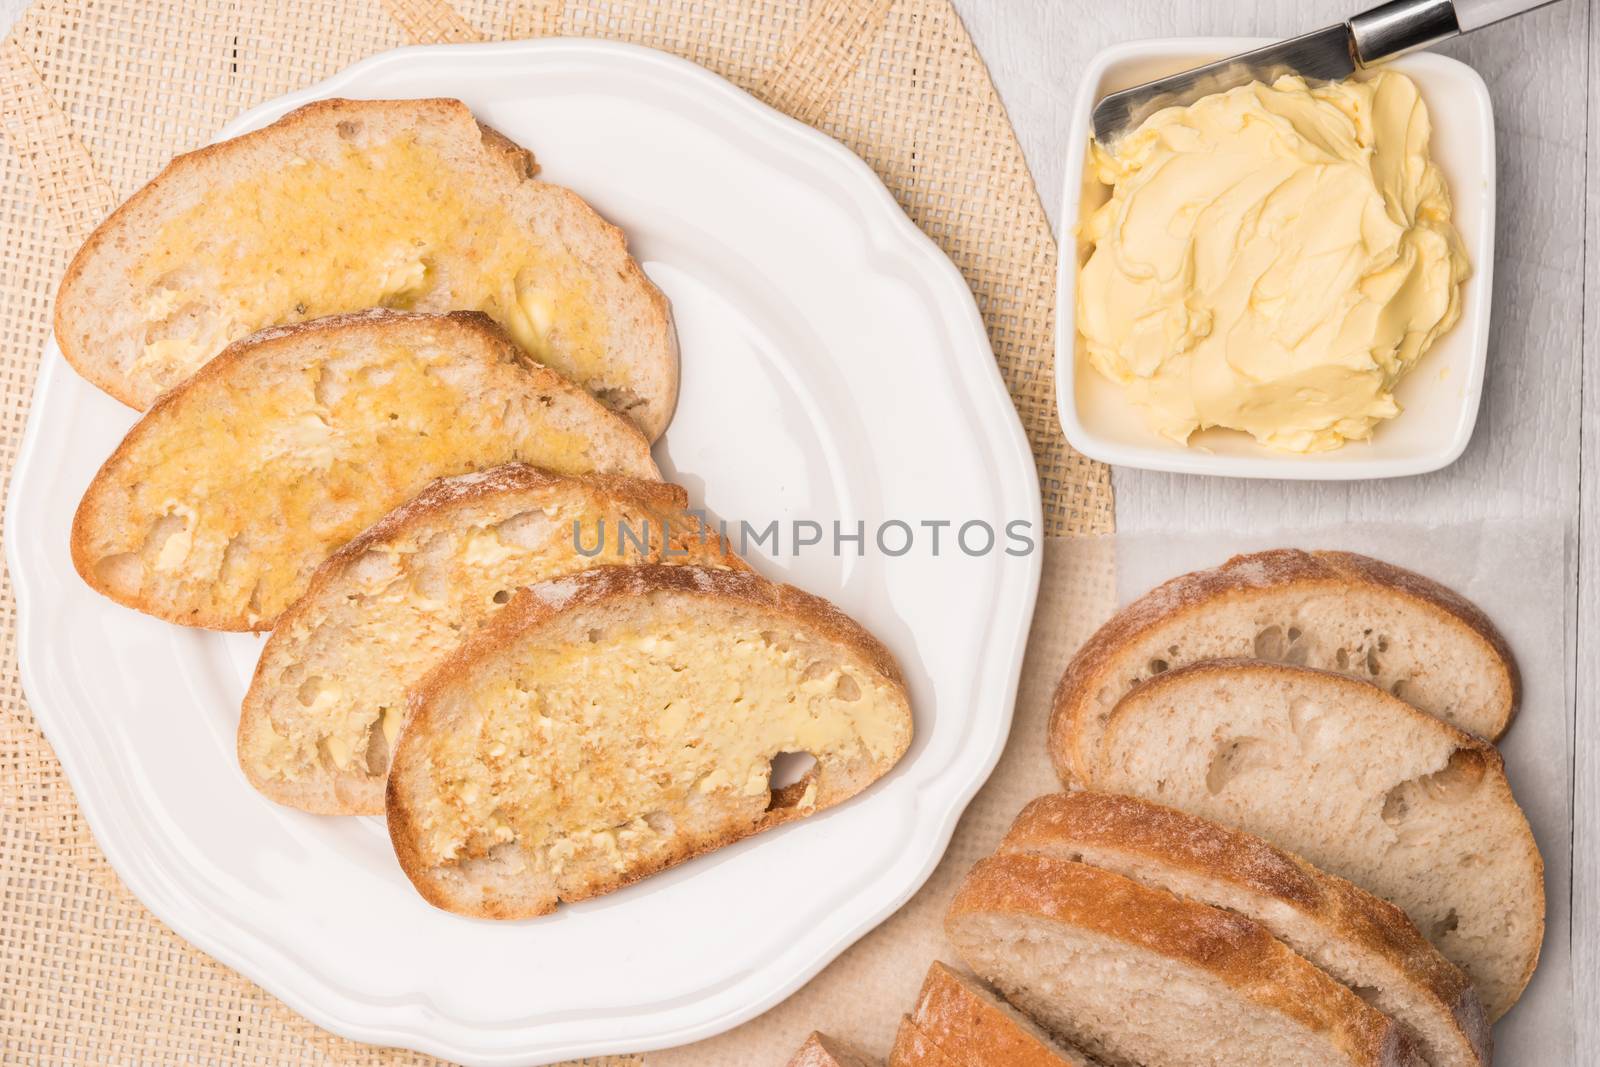 Fresh bread and homemade butter on wooden background by AnaMarques